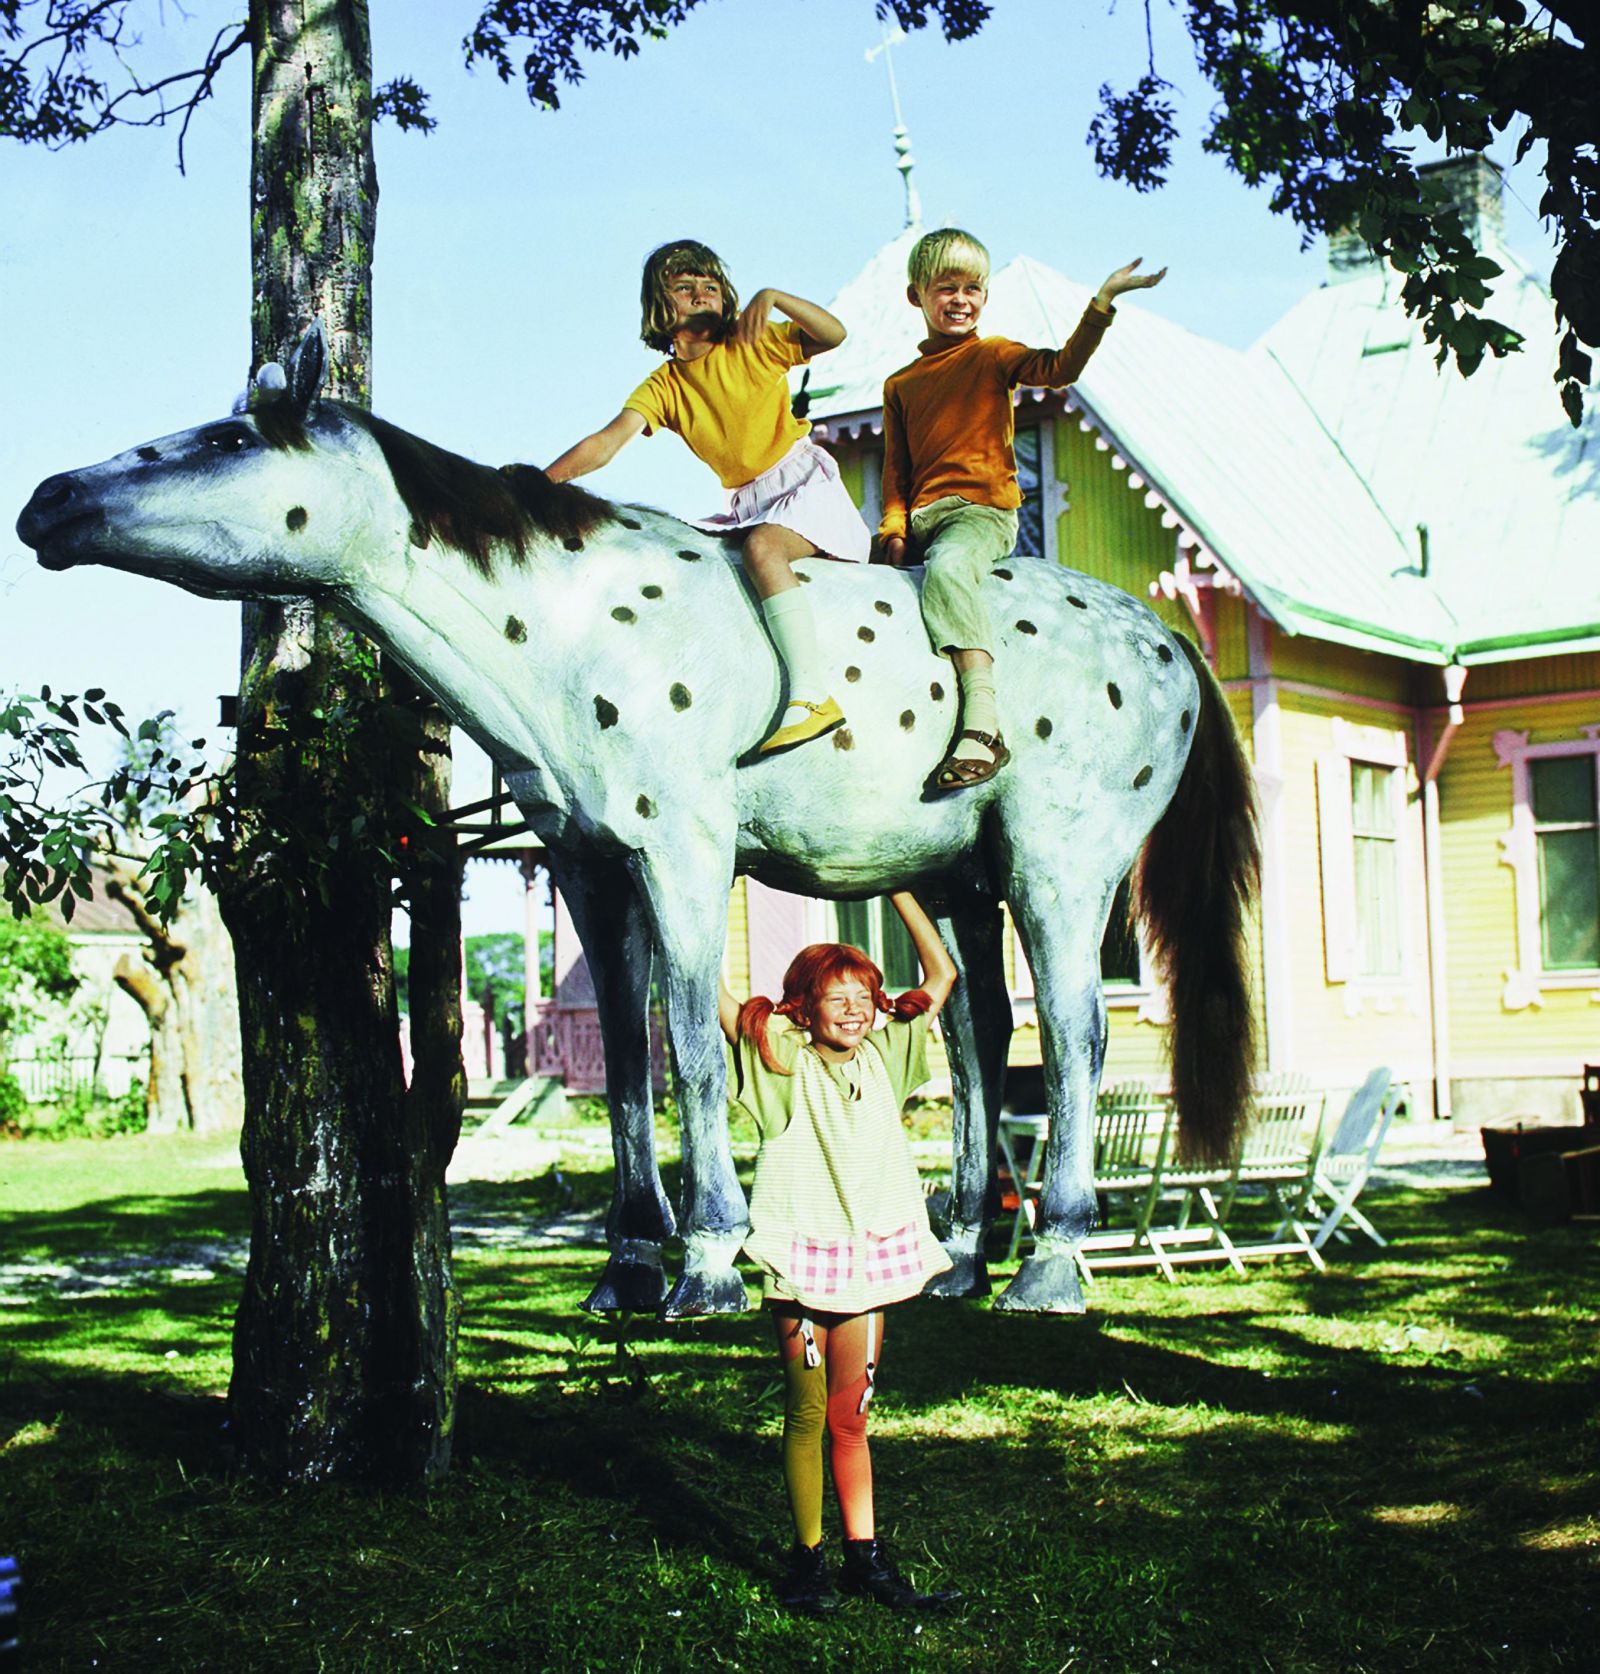 Still from the film series Pippi Longstocking (Sweden/Federal Republic of Germany 1968–1971, directed by Ole Hellbom)